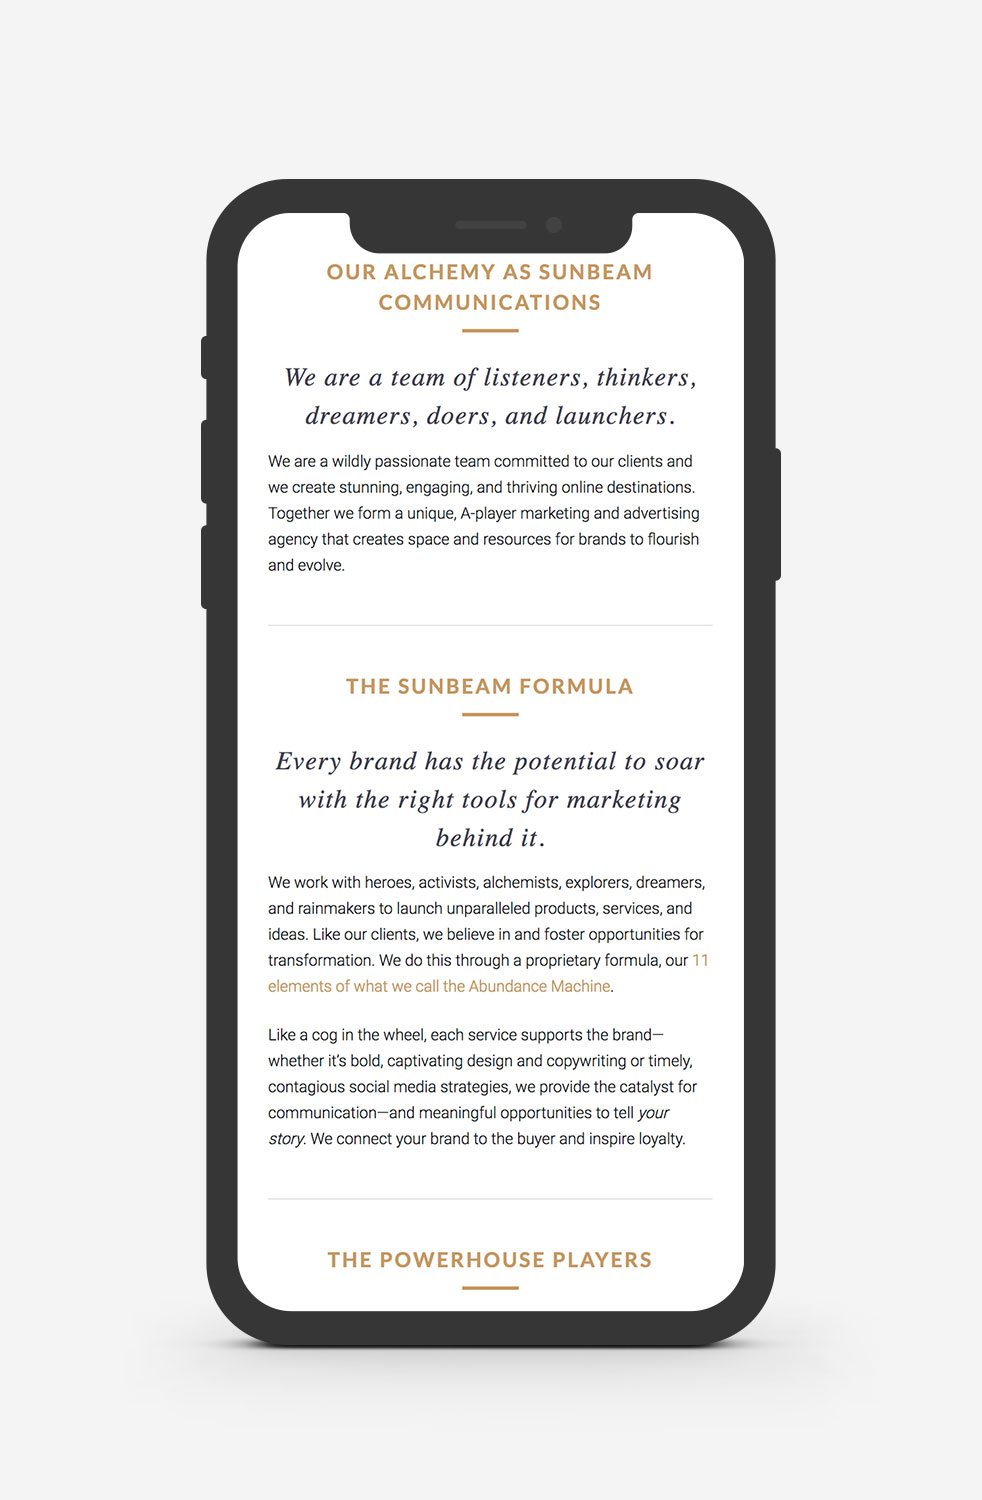 Mockup of the new Sunbeam Communications WordPress website services page on a mobile device